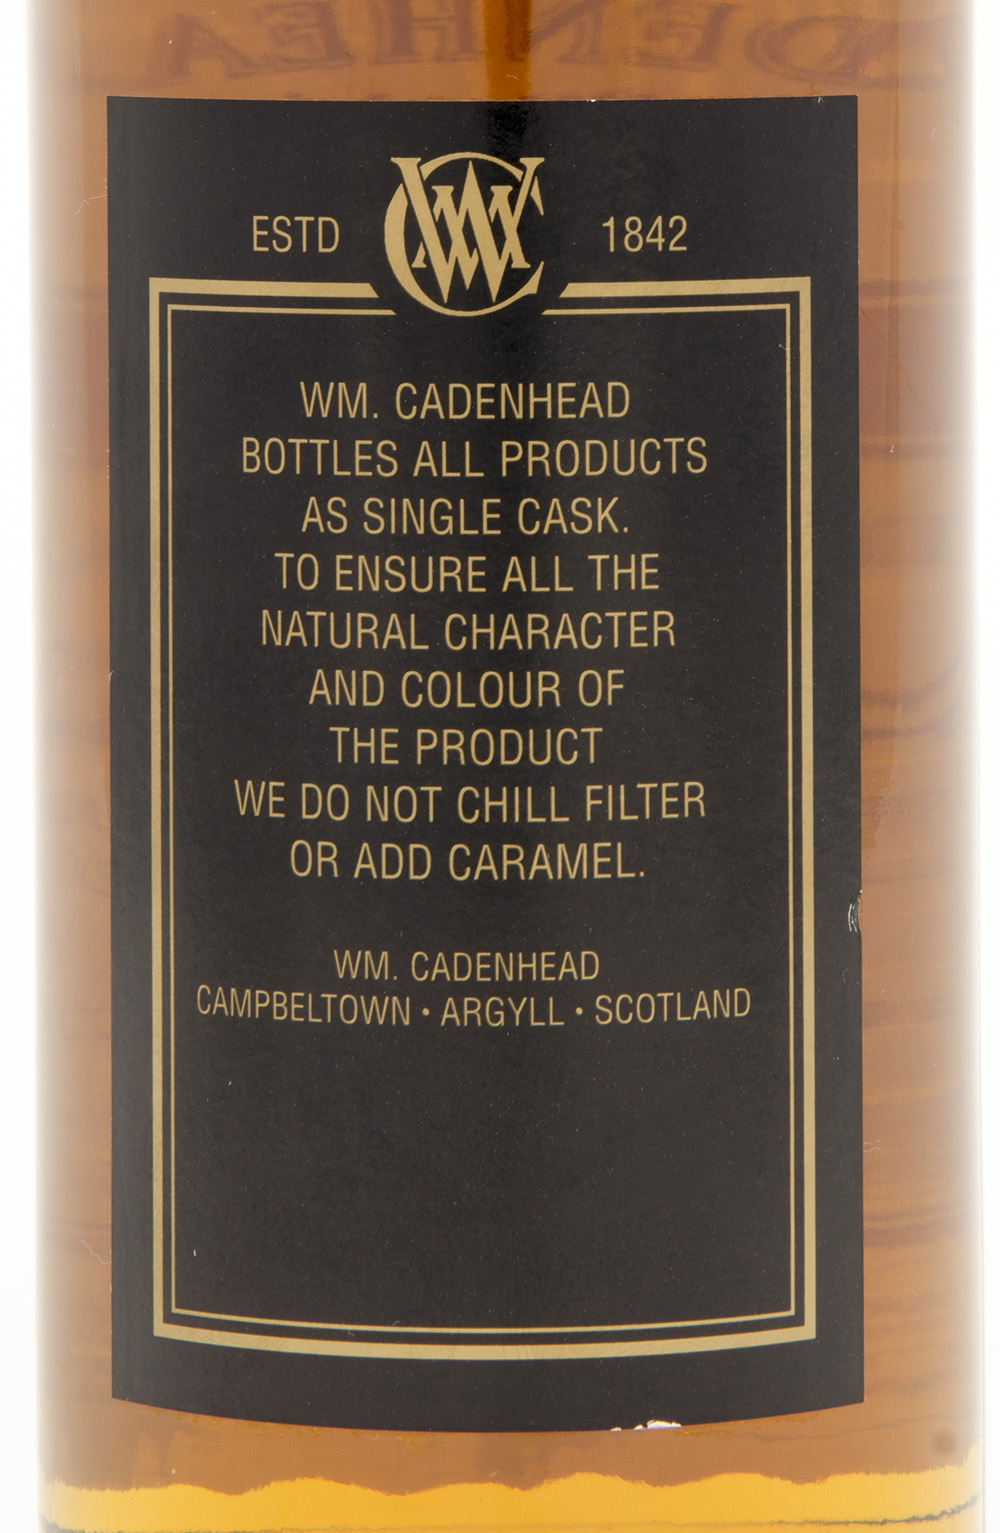 Billede: DSC_4810 - Cadenheads World Whiskies - Cradle Mountain from the Small Concern Distillery - 11 years - back label.jpg